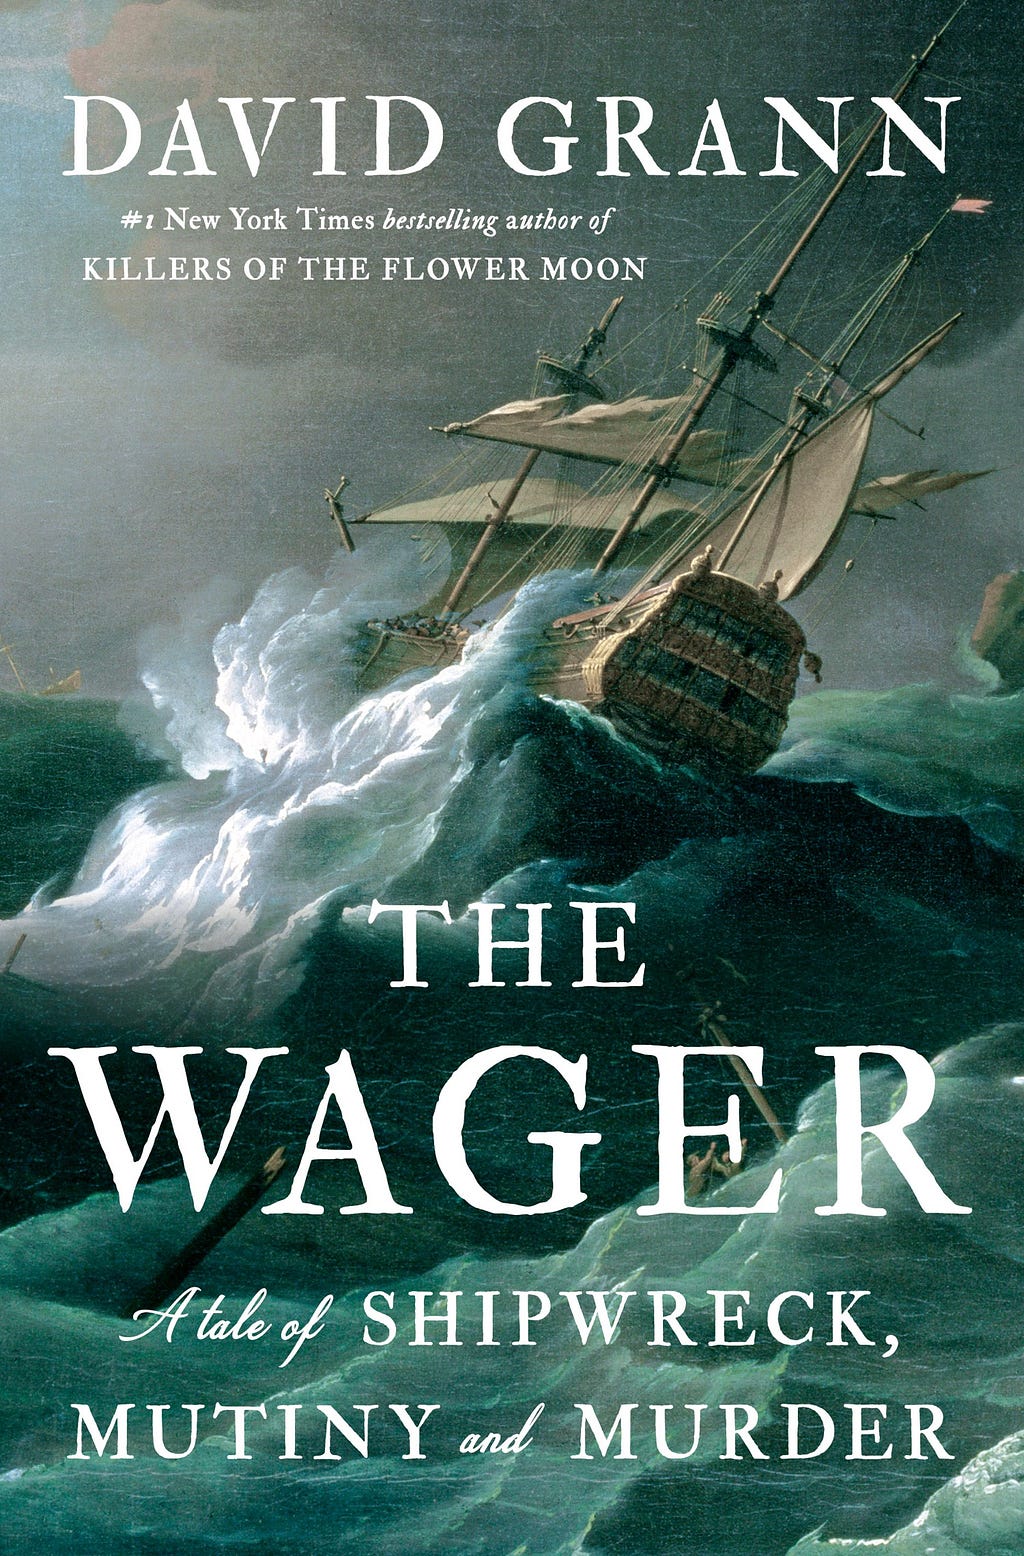 [Audiobooks] DOWNLOAD -The Wager by David Grann